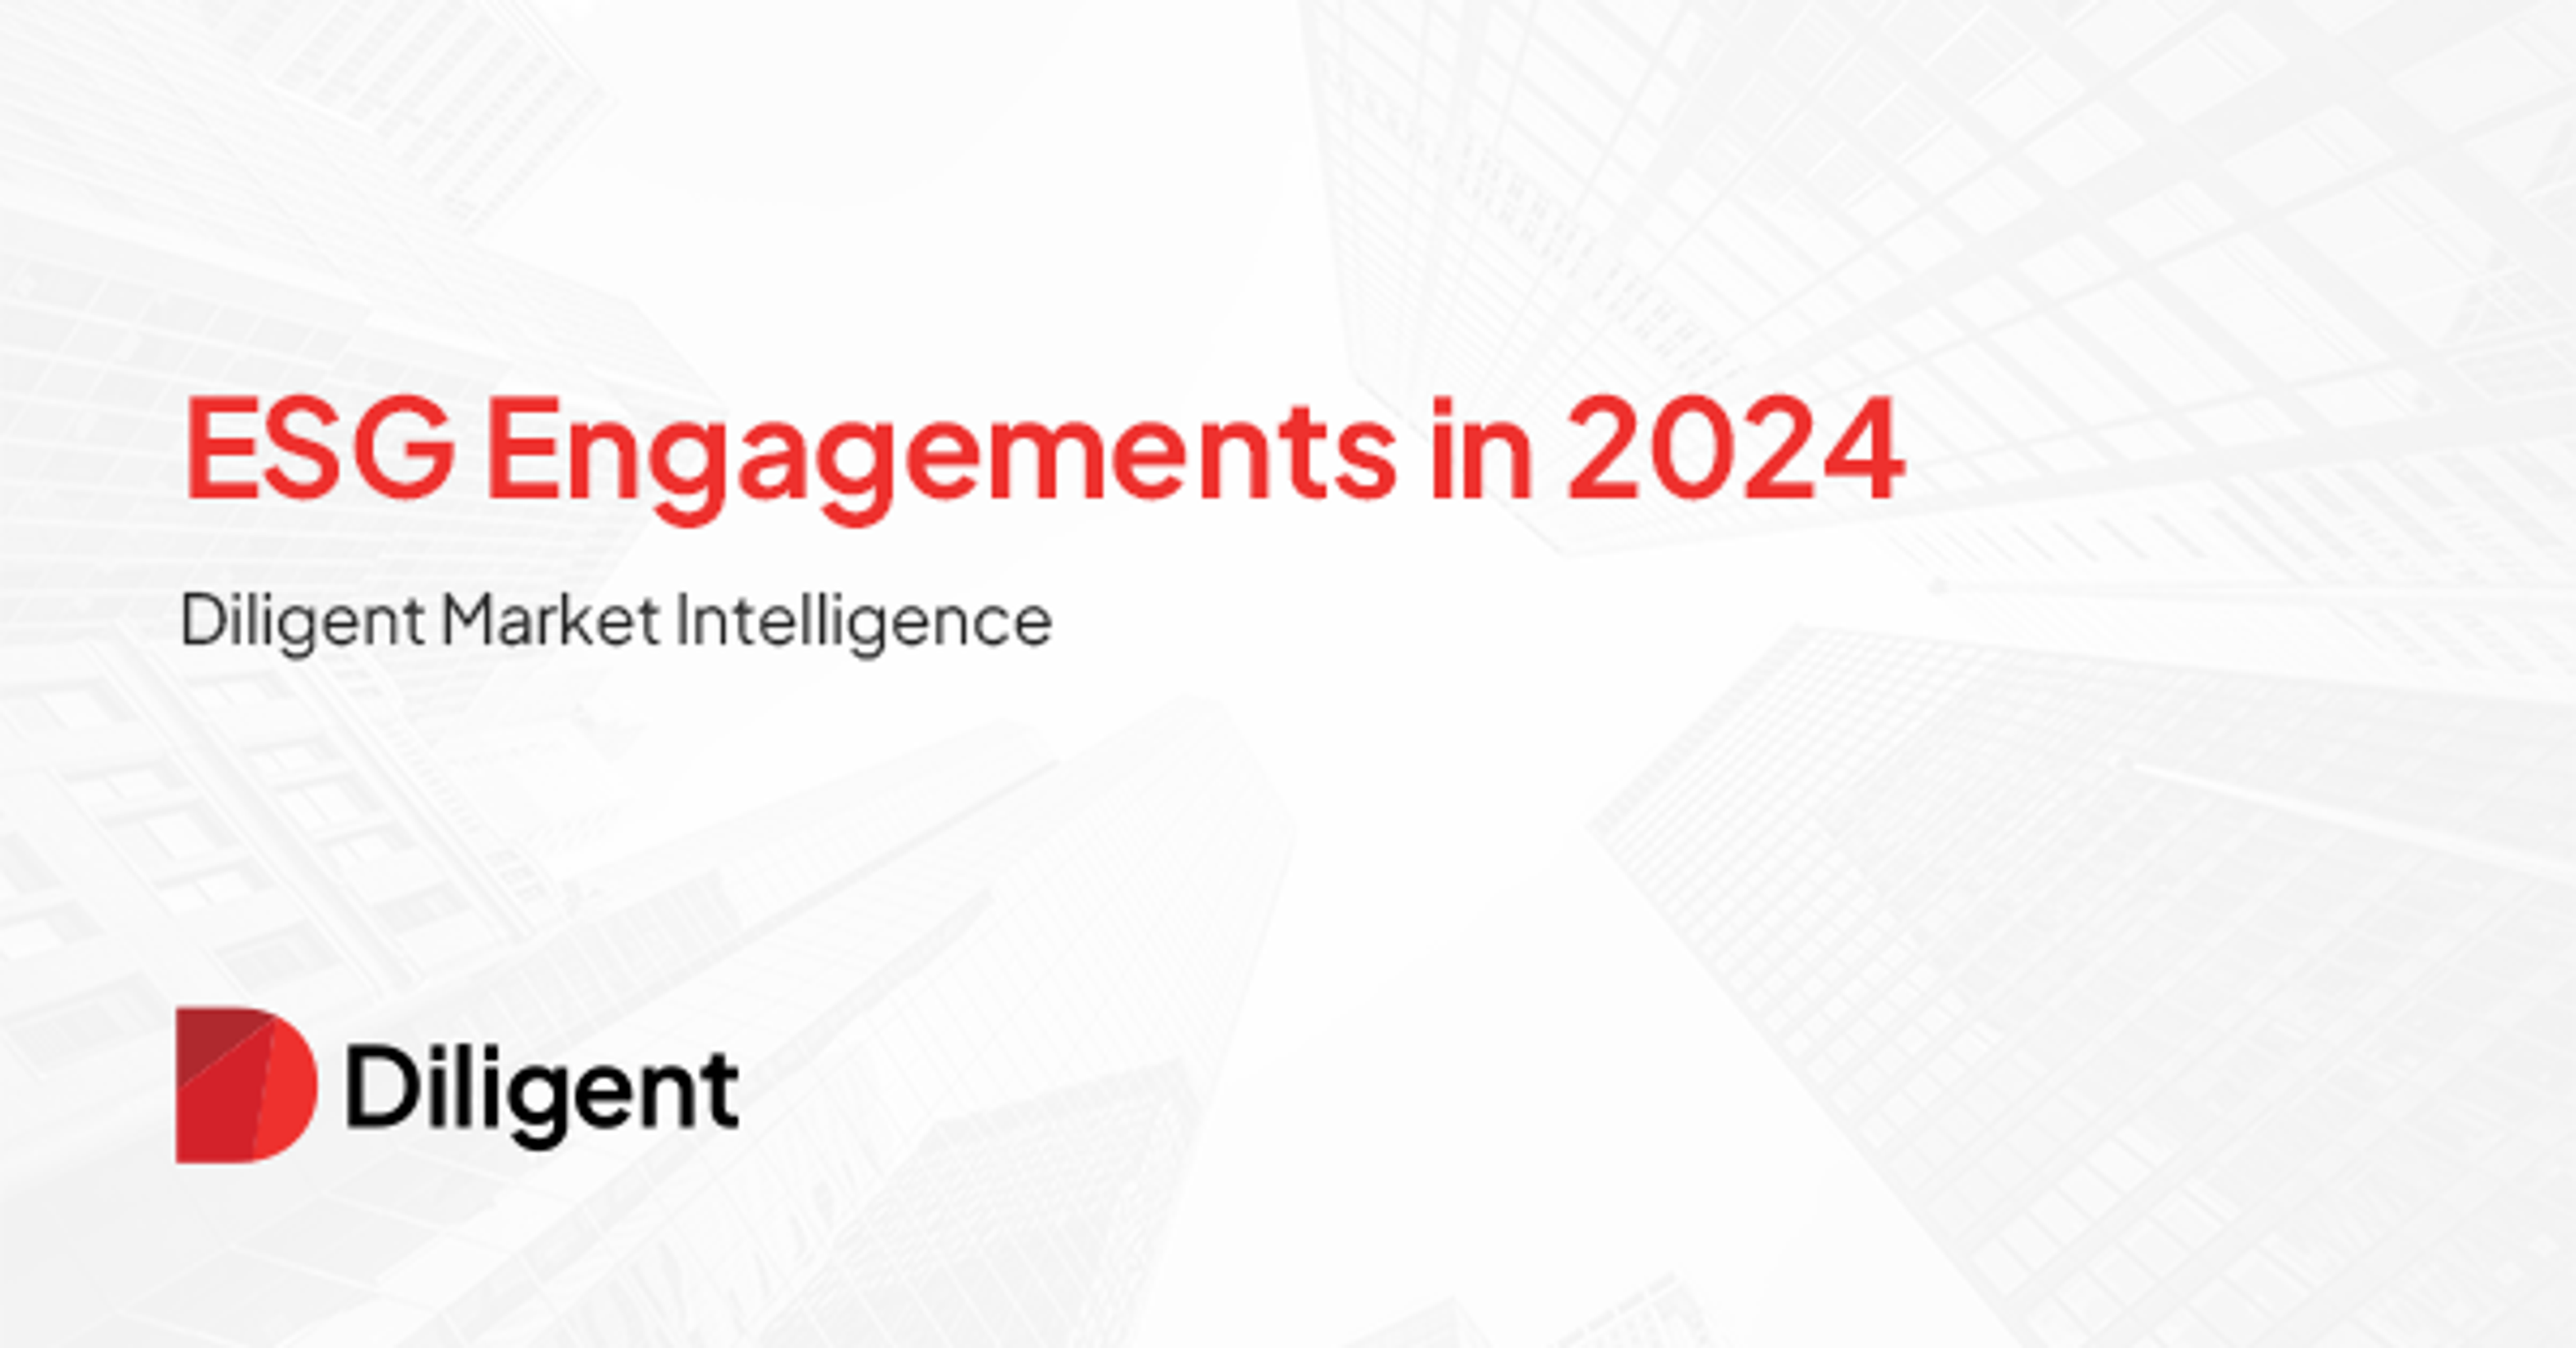 ESG Engagements in 2024